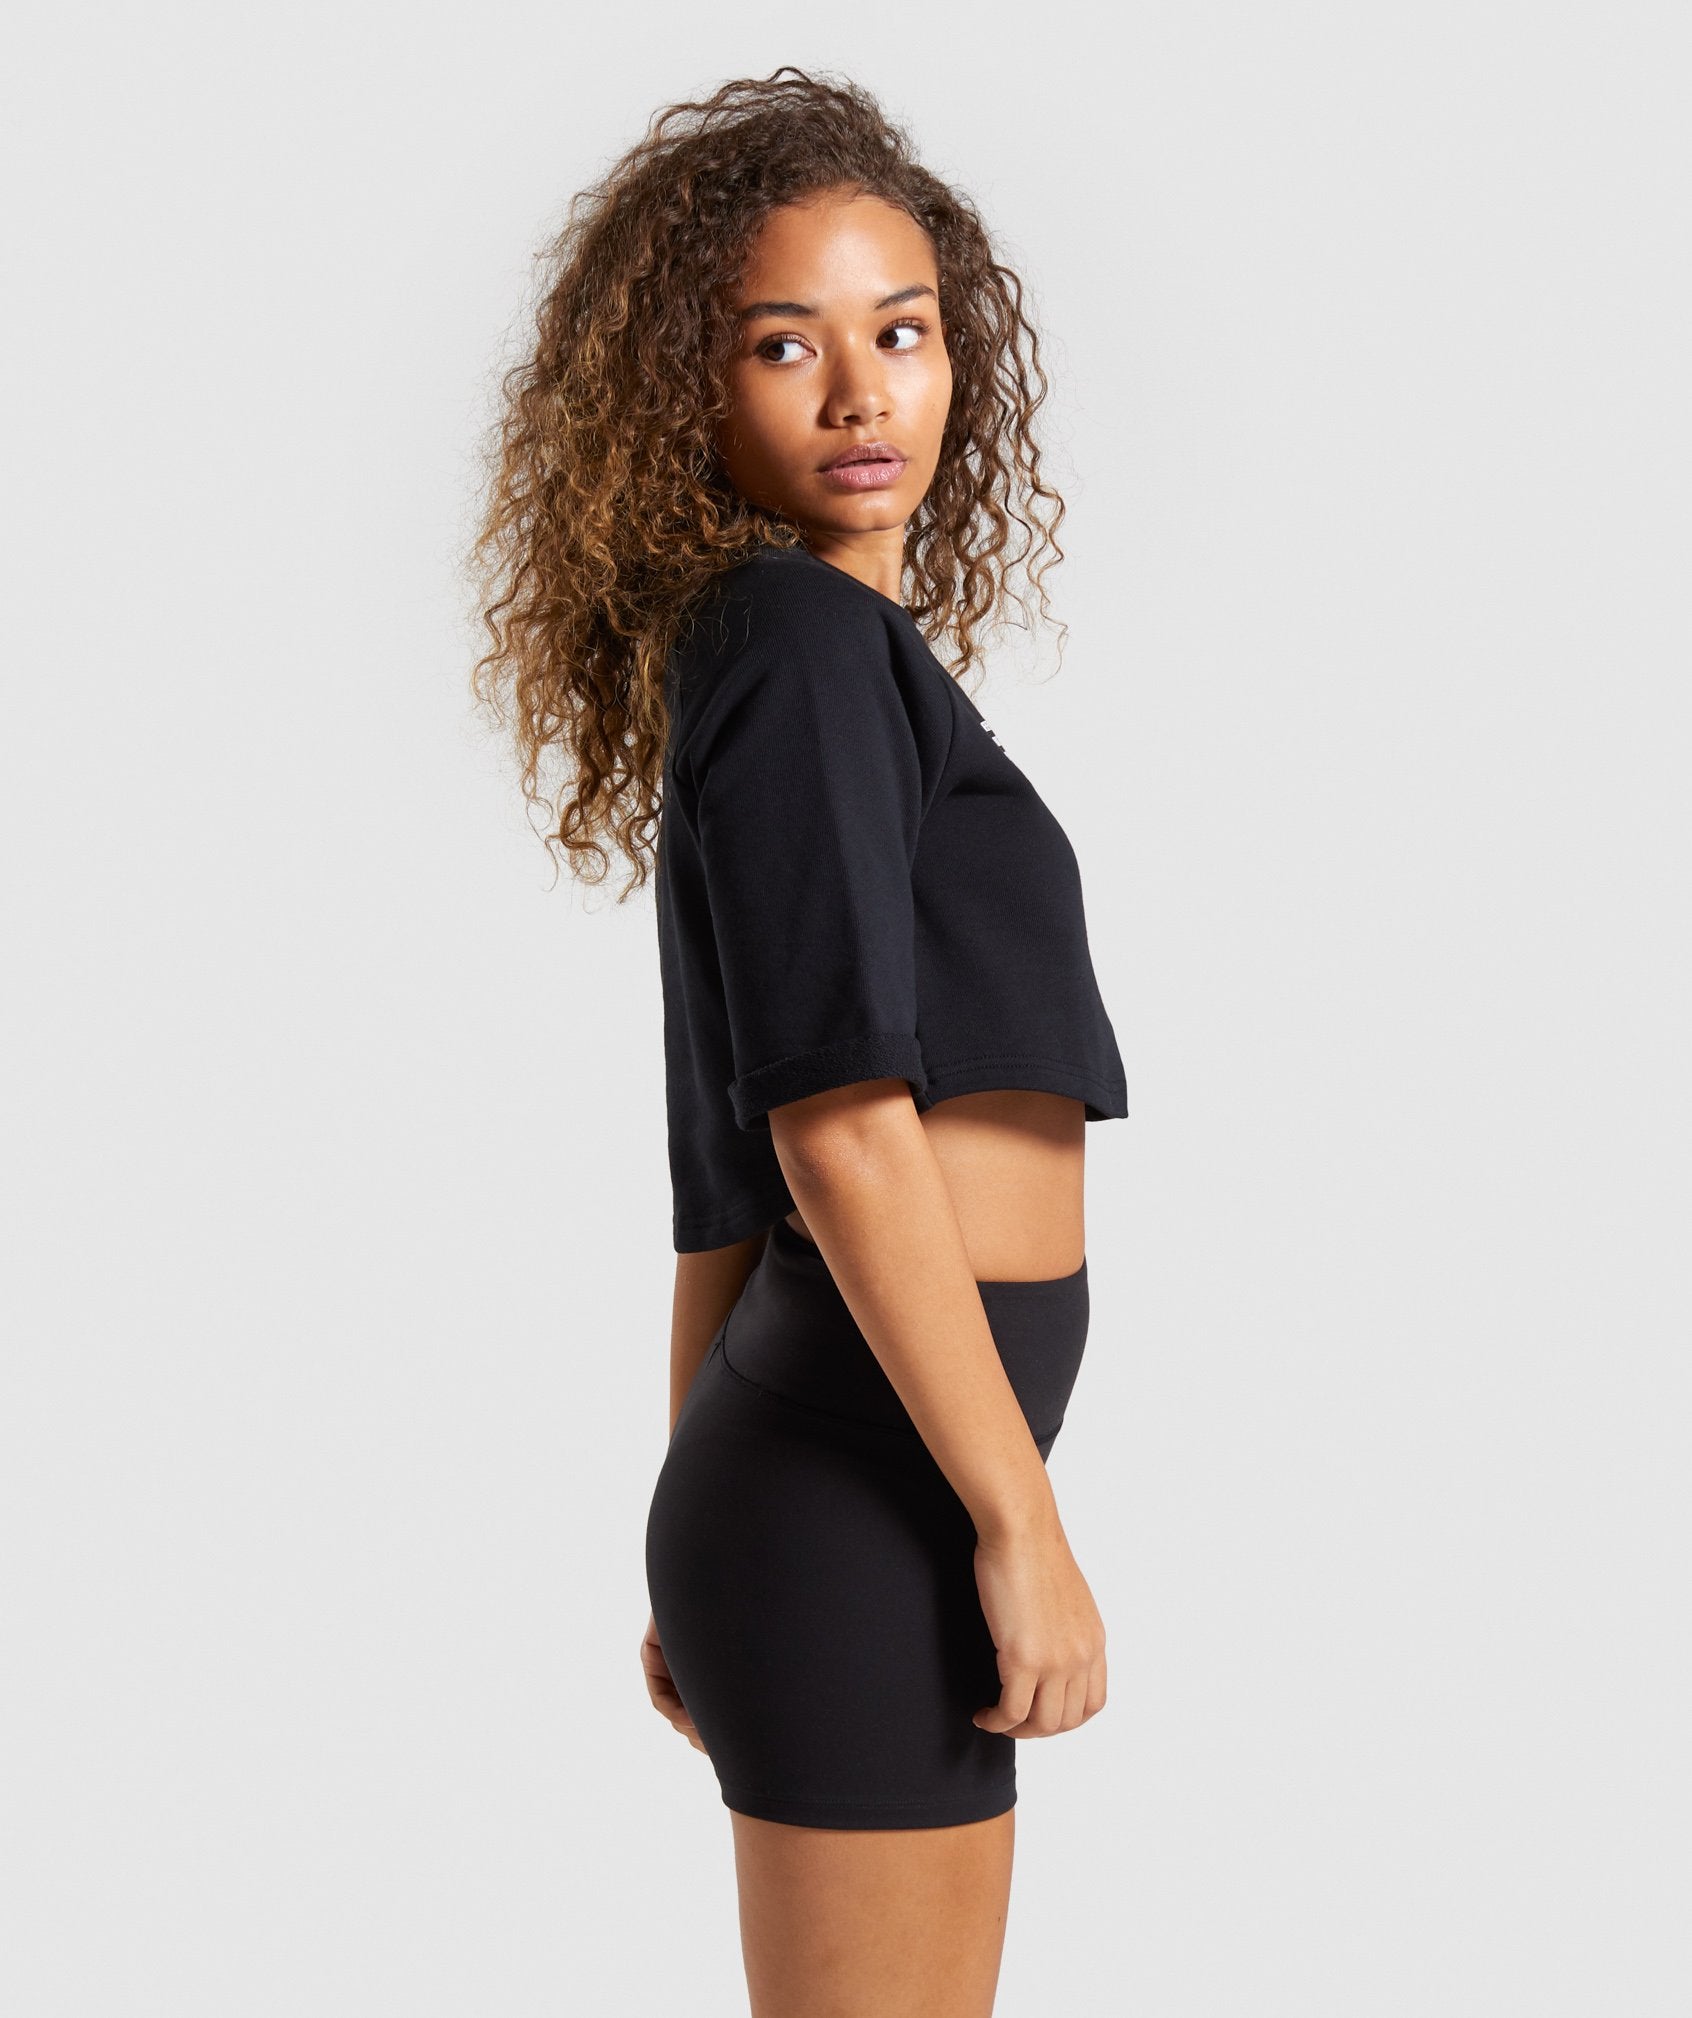 The Visionaries Boxy Cropped Sweater in Black - view 3